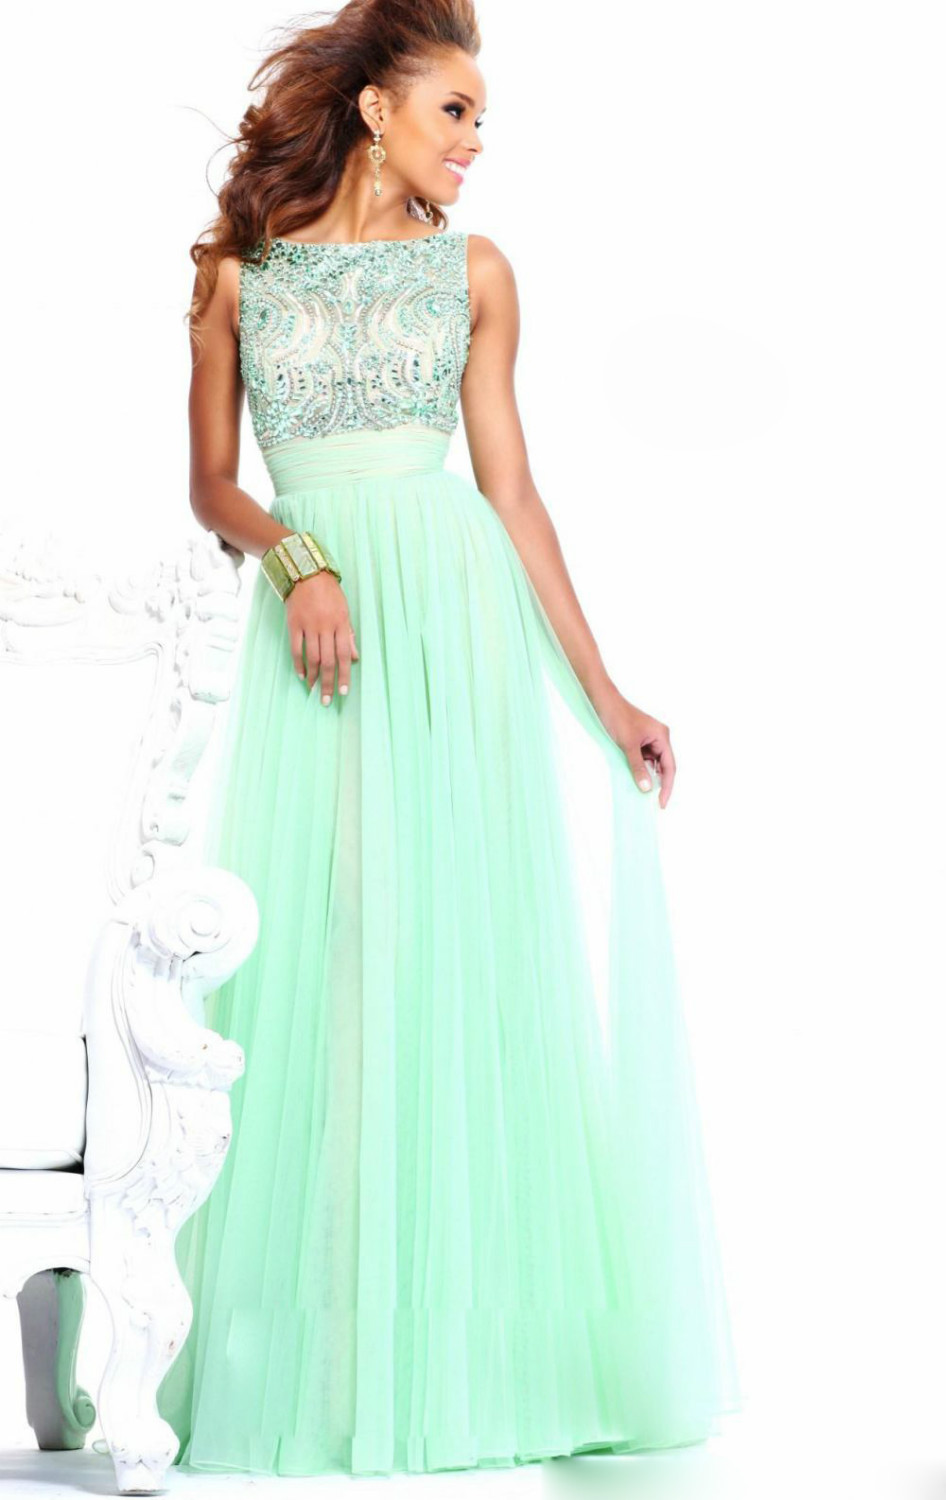 Free-Shipping-2014-Mint-Prom-Dresses-Long-Chiff-New-Densign-Under-100 ...